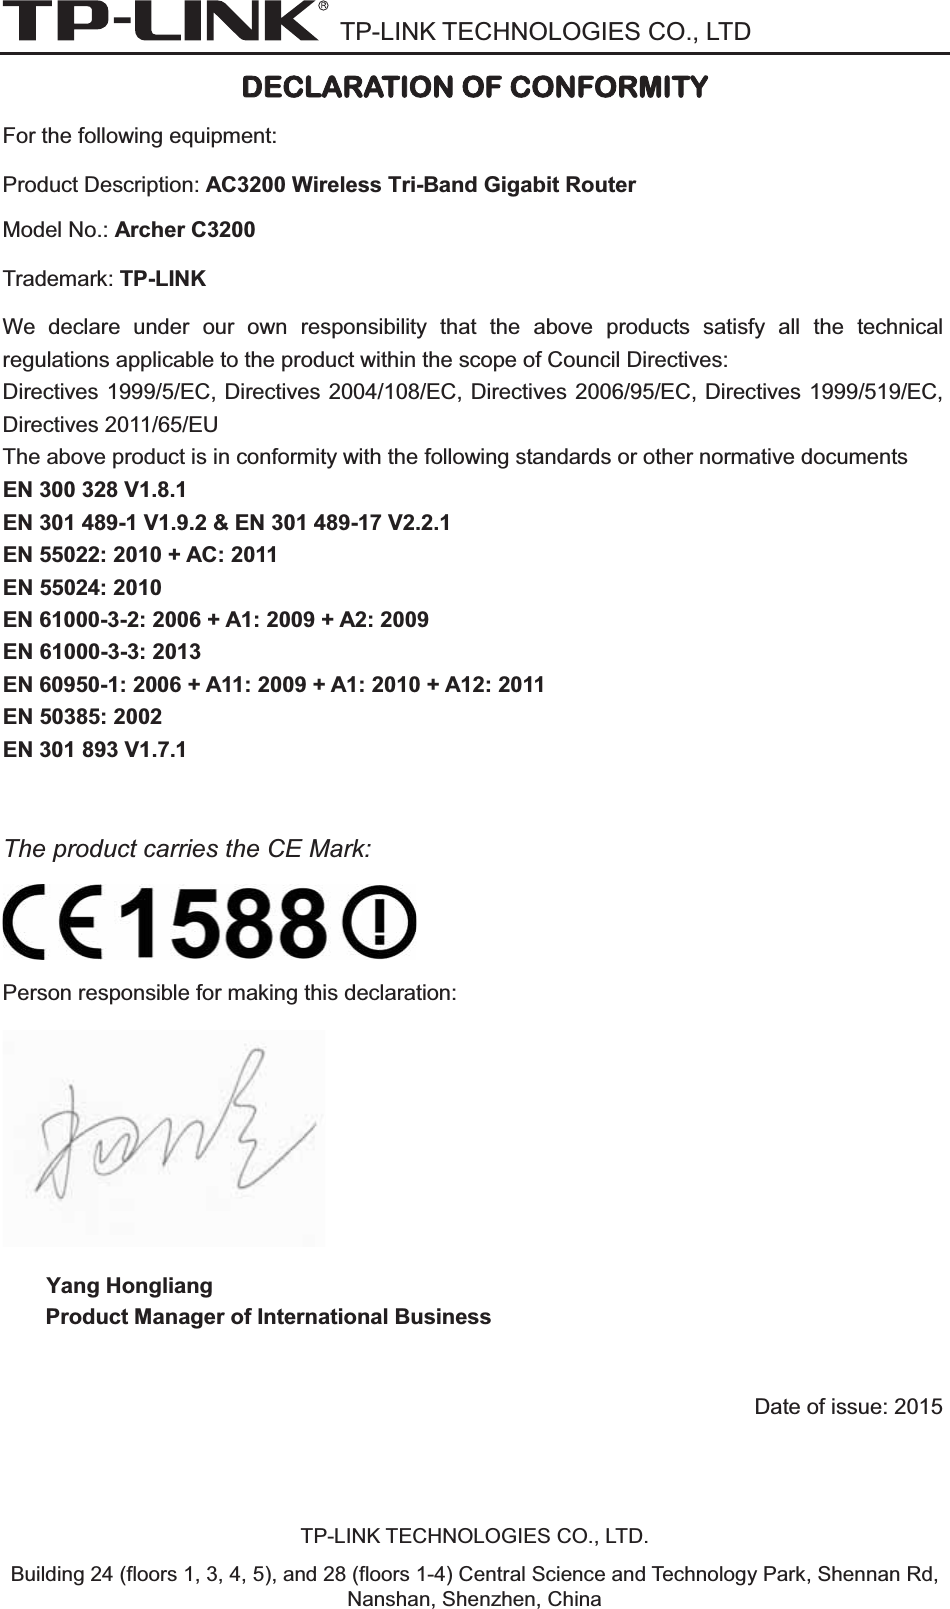 TP-LINK TECHNOLOGIES CO., LTD DDECLARATION OF CONFORMITY For the following equipment: Product Description: AC3200 Wireless Tri-Band Gigabit Router Model No.: Archer C3200Trademark: TP-LINK We declare under our own responsibility that the above products satisfy all the technical regulations applicable to the product within the scope of Council Directives:     Directives 1999/5/EC, Directives 2004/108/EC, Directives 2006/95/EC, Directives 1999/519/EC, Directives 2011/65/EU The above product is in conformity with the following standards or other normative documents EN 300 328 V1.8.1     EN 301 489-1 V1.9.2 &amp; EN 301 489-17 V2.2.1     EN 55022: 2010 + AC: 2011 EN 55024: 2010 EN 61000-3-2: 2006 + A1: 2009 + A2: 2009 EN 61000-3-3: 2013 EN 60950-1: 2006 + A11: 2009 + A1: 2010 + A12: 2011     EN 50385: 2002     EN 301 893 V1.7.1 The product carries the CE Mark: Person responsible for making this declaration: Yang Hongliang Product Manager of International Business Date of issue: 2015TP-LINK TECHNOLOGIES CO., LTD. Building 24 (floors 1, 3, 4, 5), and 28 (floors 1-4) Central Science and Technology Park, Shennan Rd, Nanshan, Shenzhen, China 